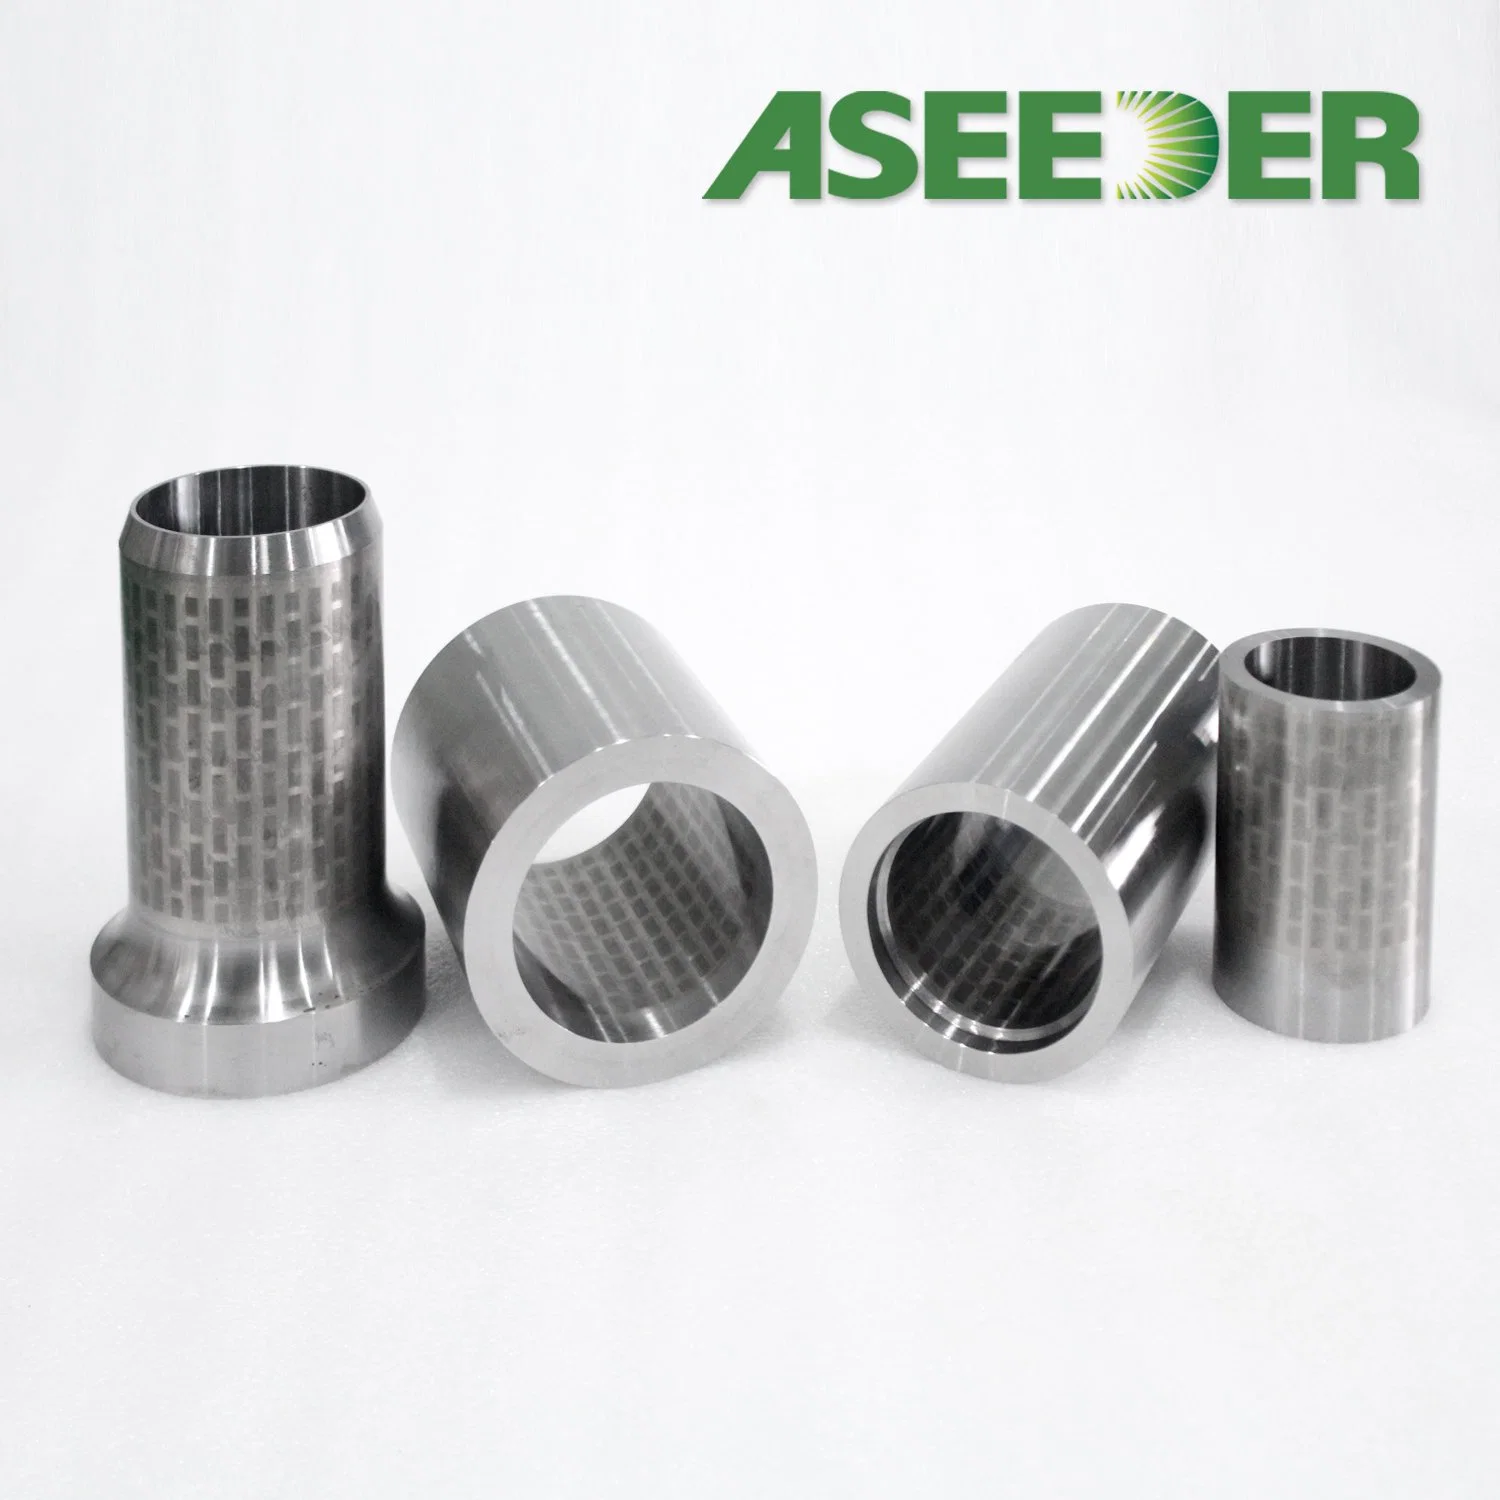 Tungsten Carbide Wear Tools for All Types of Machinery Support OEM for Small Quantity in High quality/High cost performance 